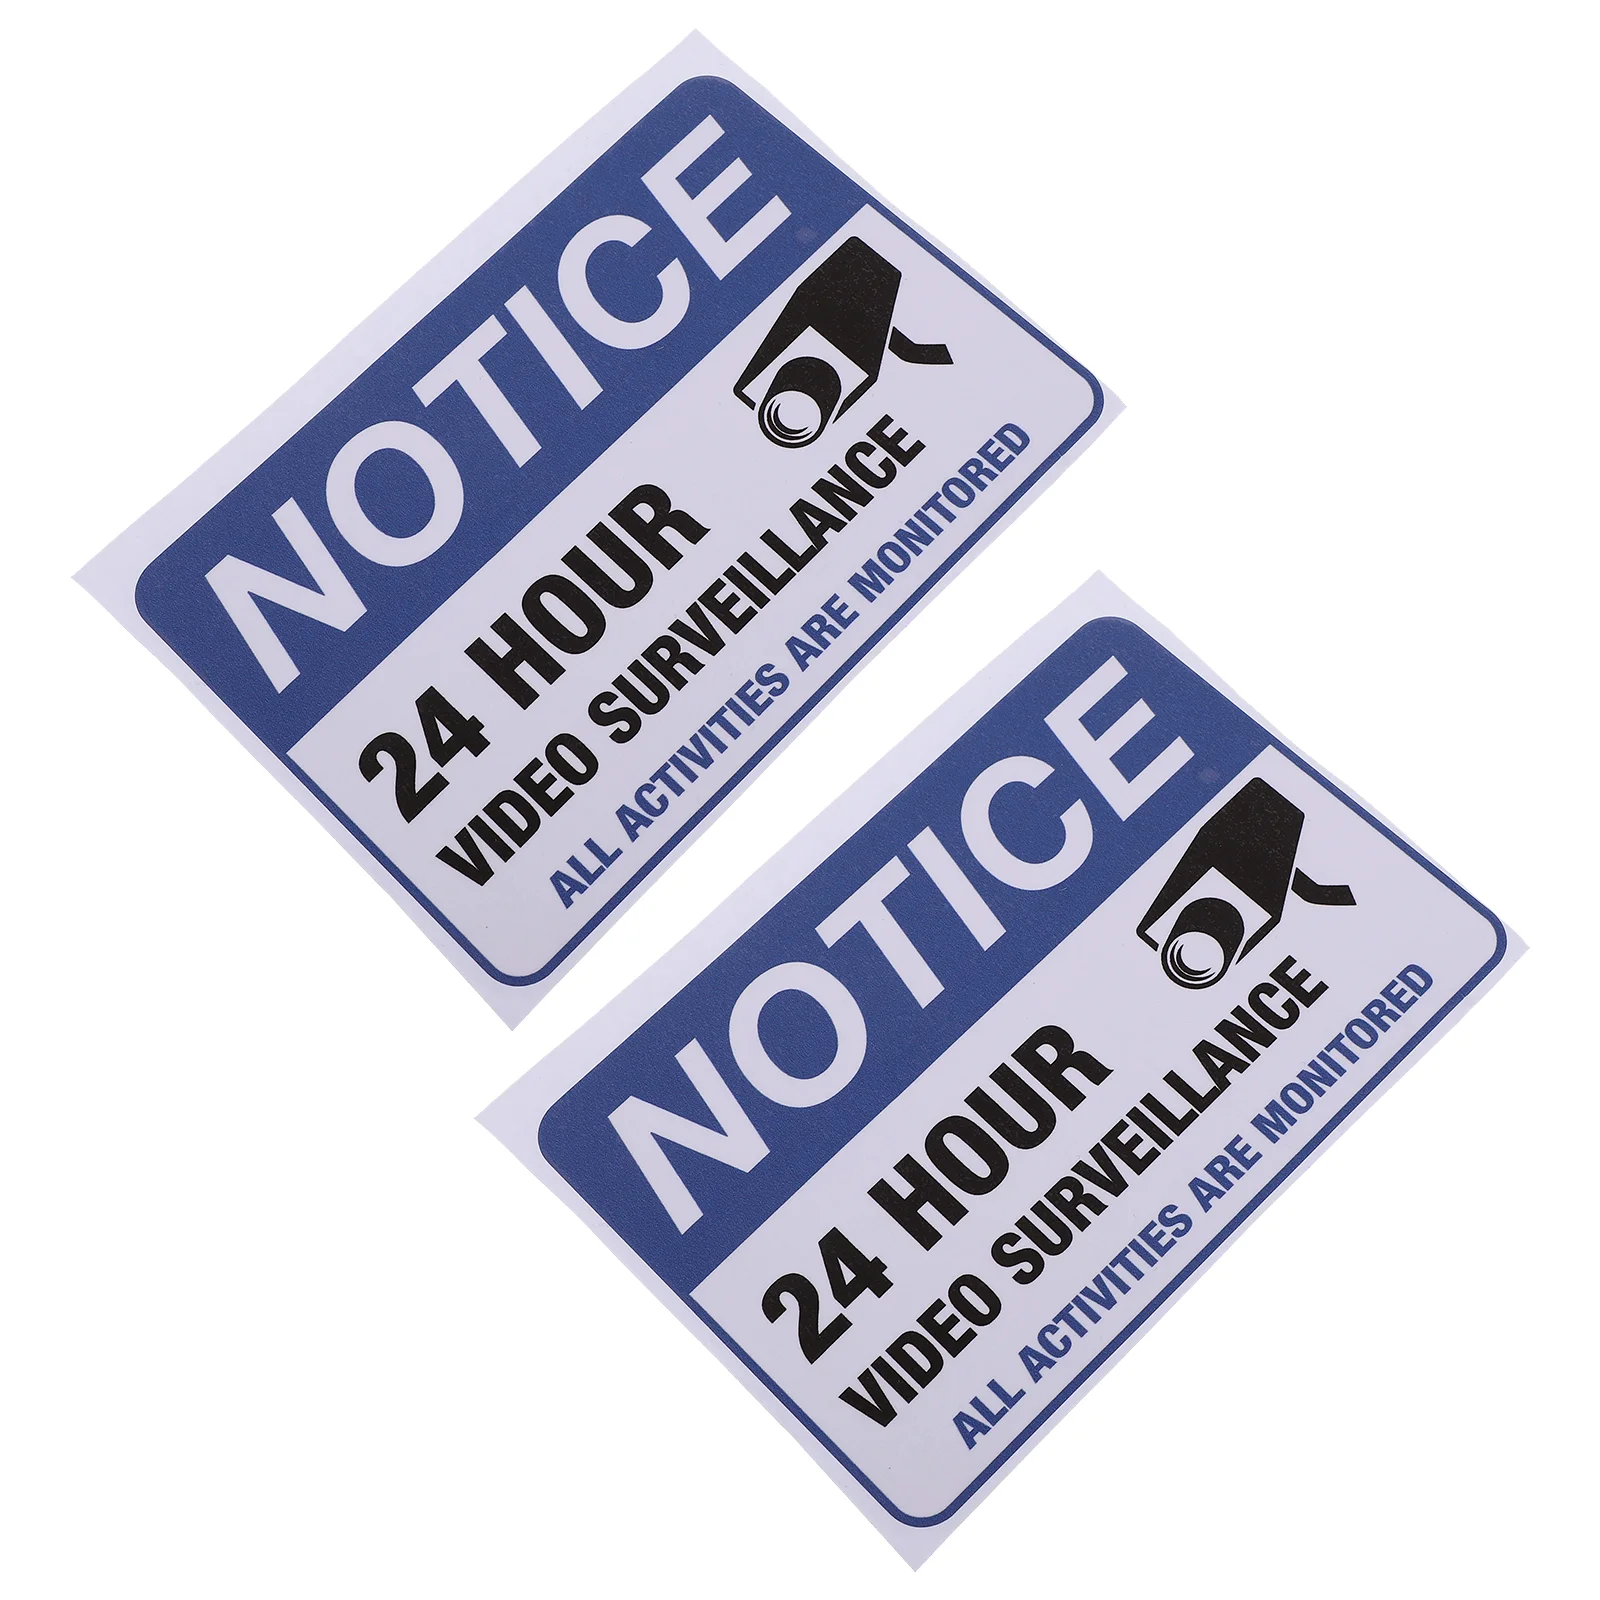 

Warning Monitored Sign Stickers Label Signs Store Outdoor Indoor Supplies Home Activities Are All Surveillance Video Hour 24